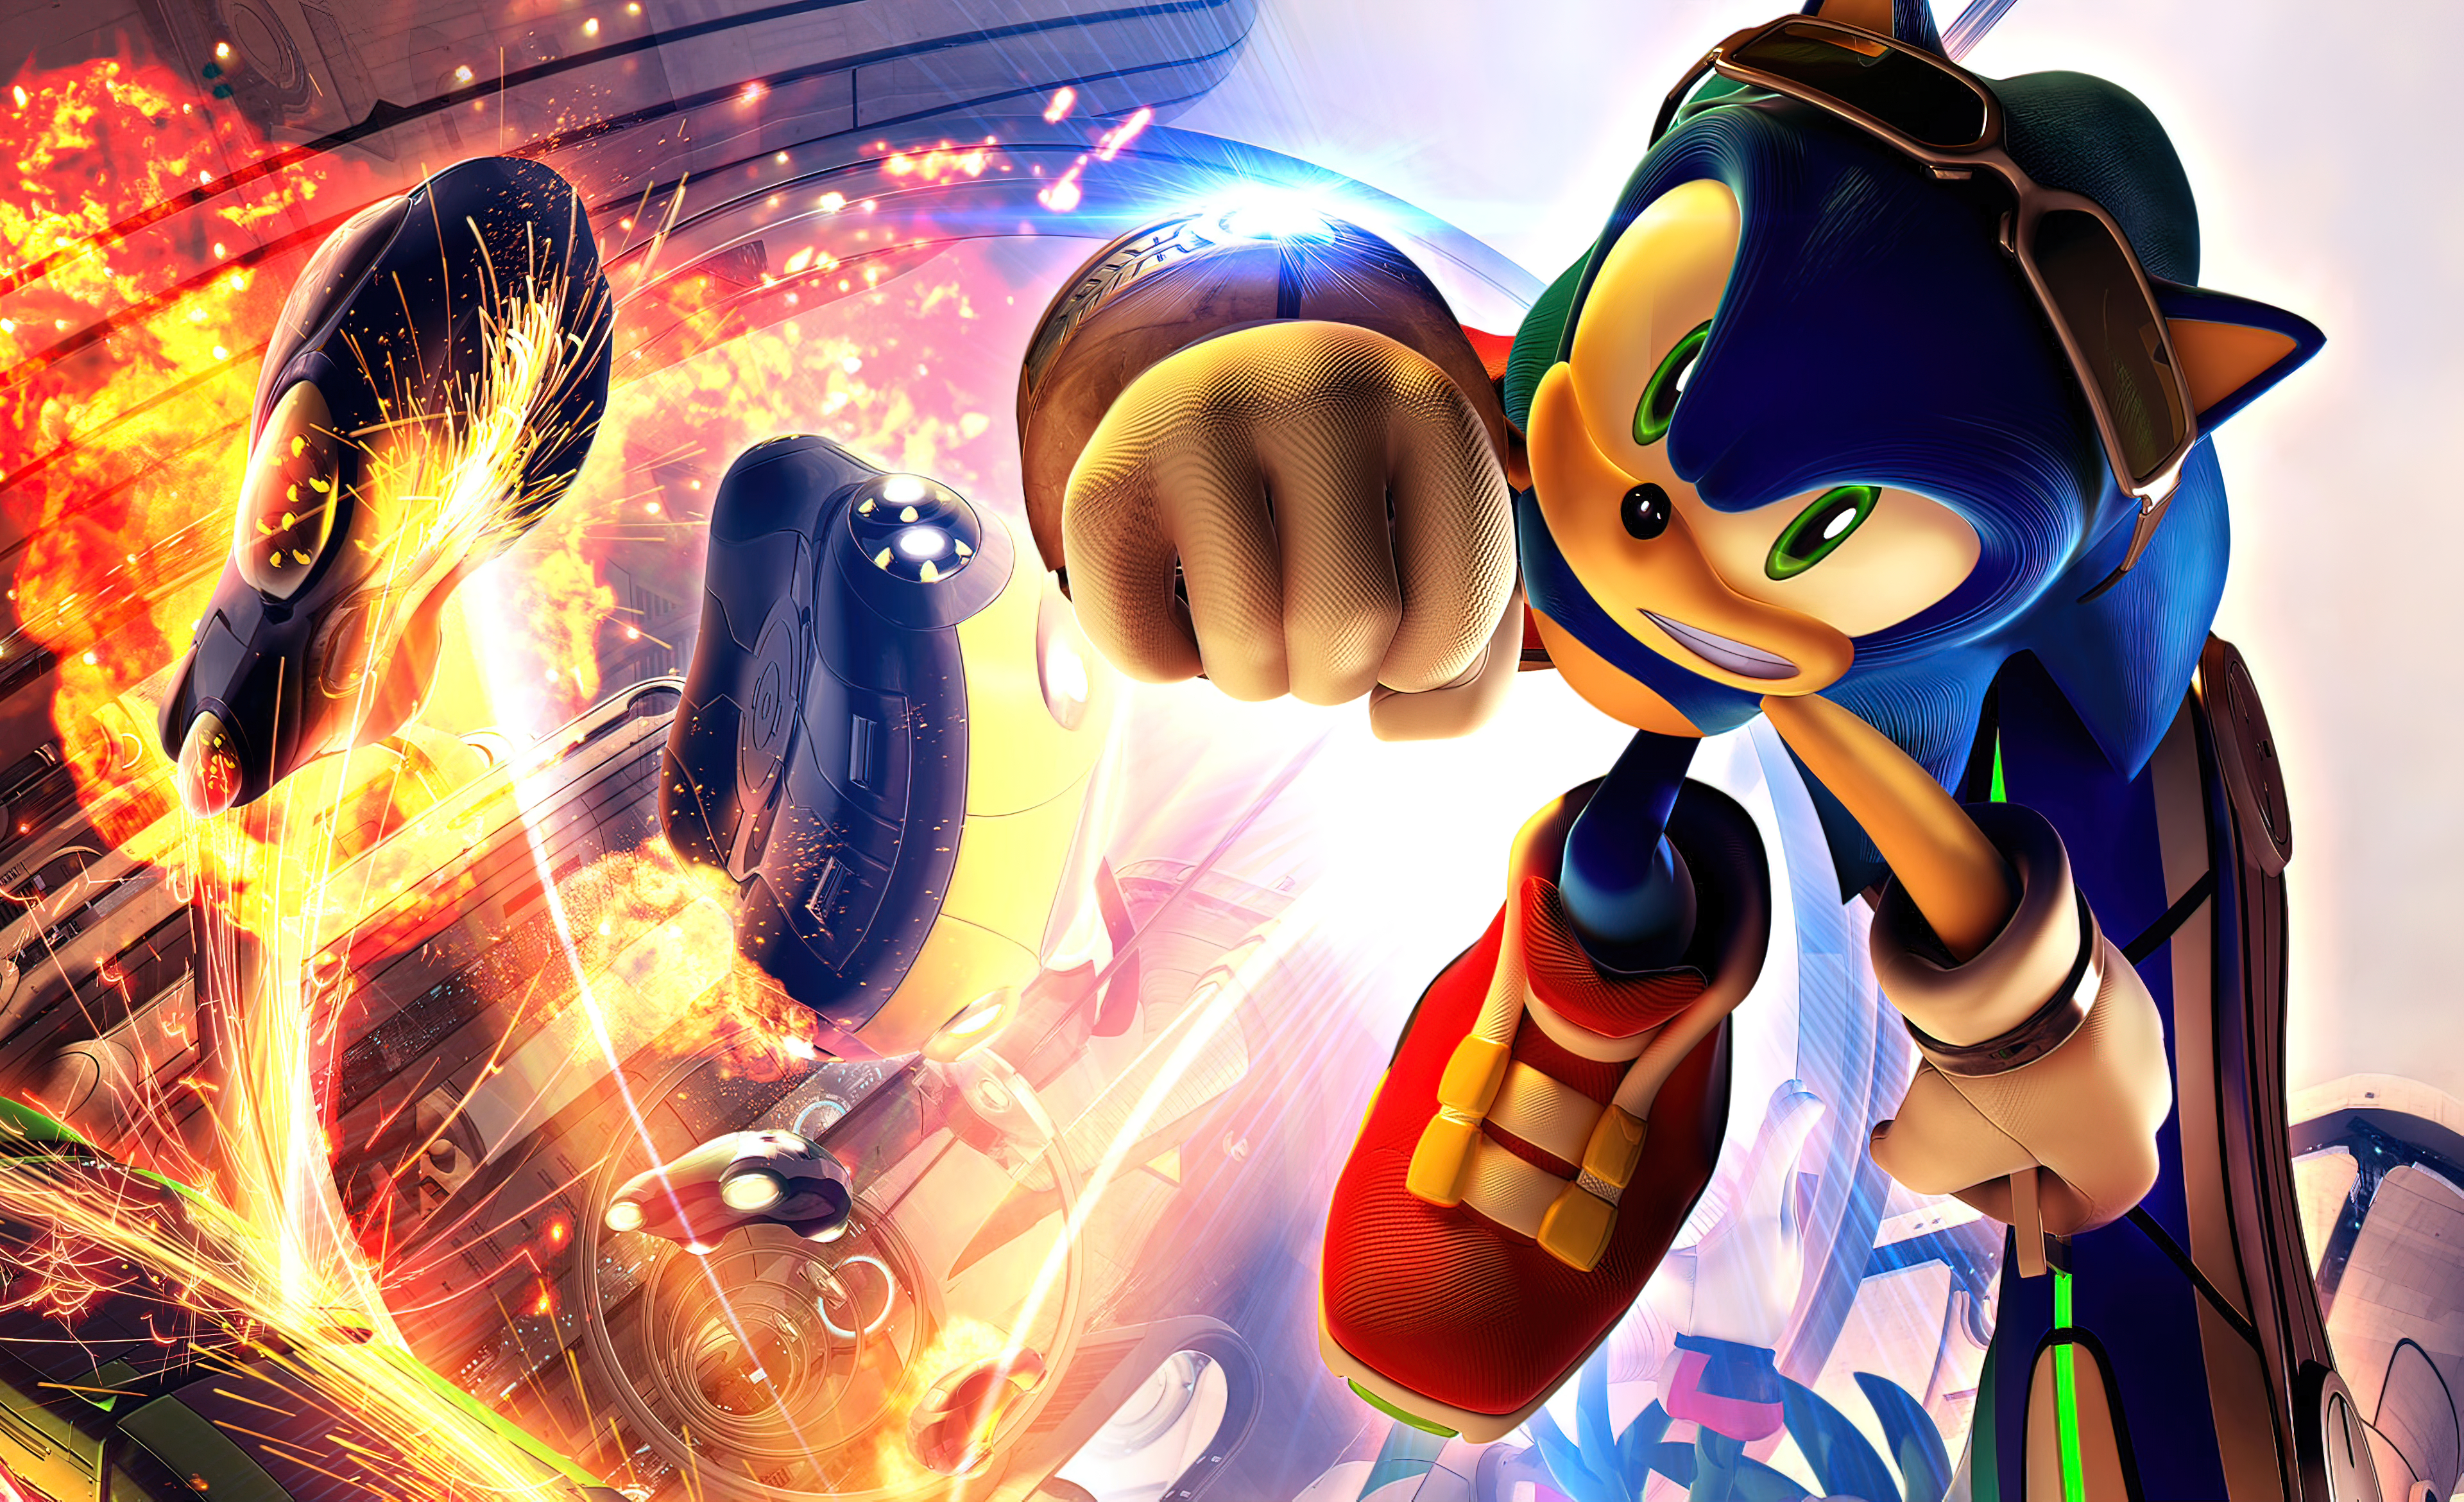 General 3840x2340 Sonic Riders Sonic Sonic the Hedgehog Jet the Hawk zero gravity Sega skateboarding hoverboard video game art artwork video game characters PC gaming video games